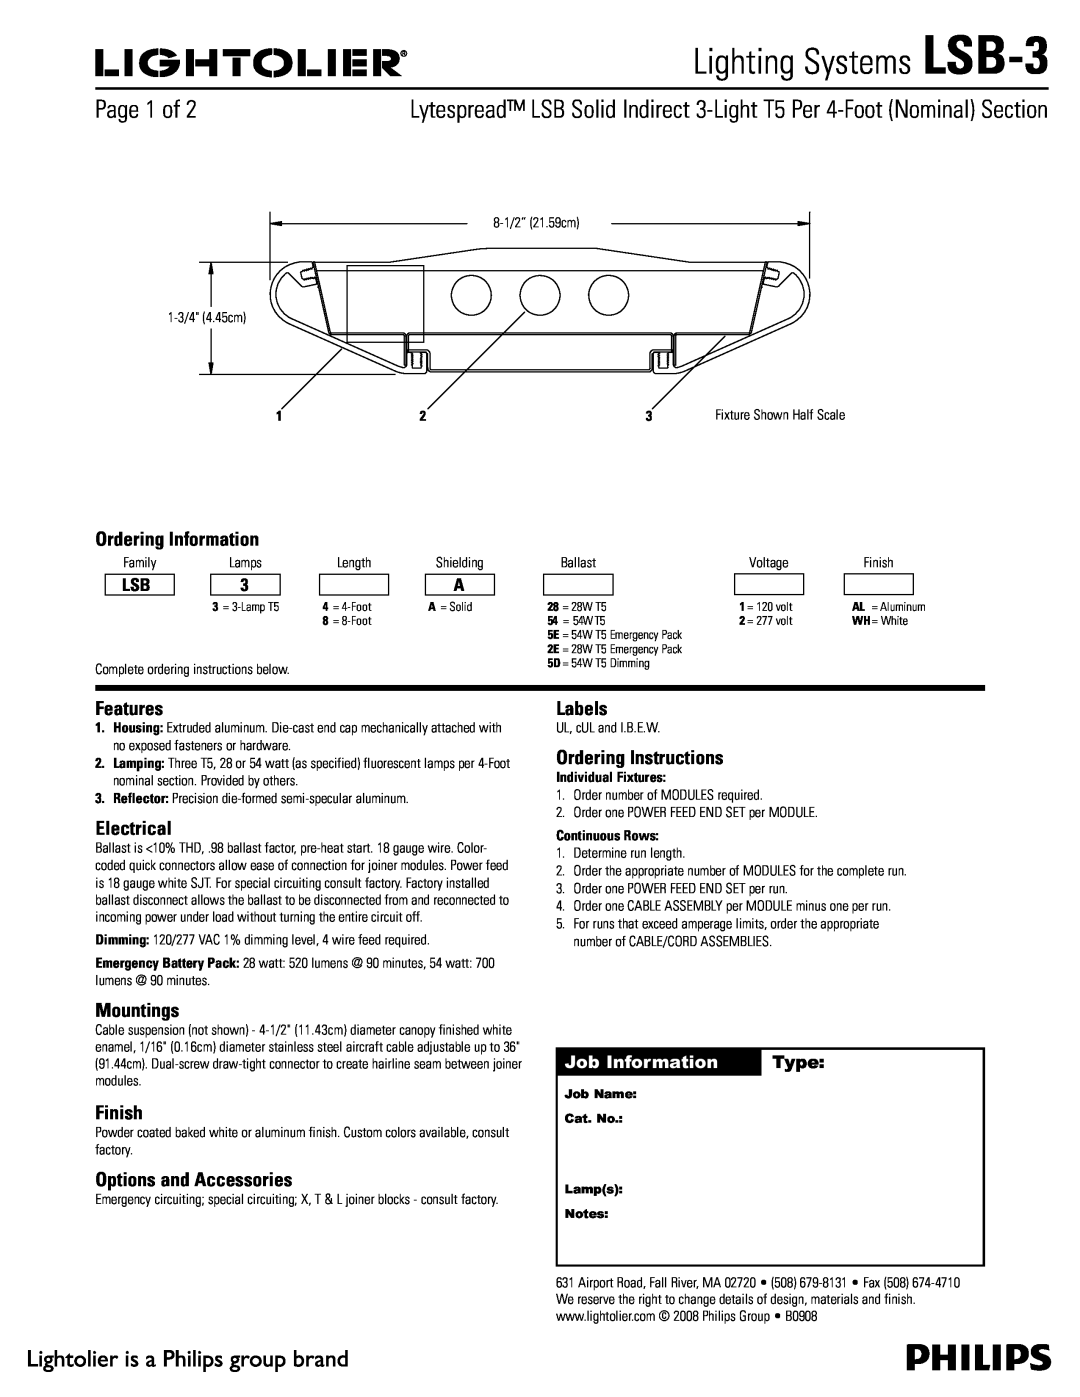 Lightolier LSB-3 manual Ordering Information, Features, Electrical, Mountings, Finish, Options and Accessories, Labels 